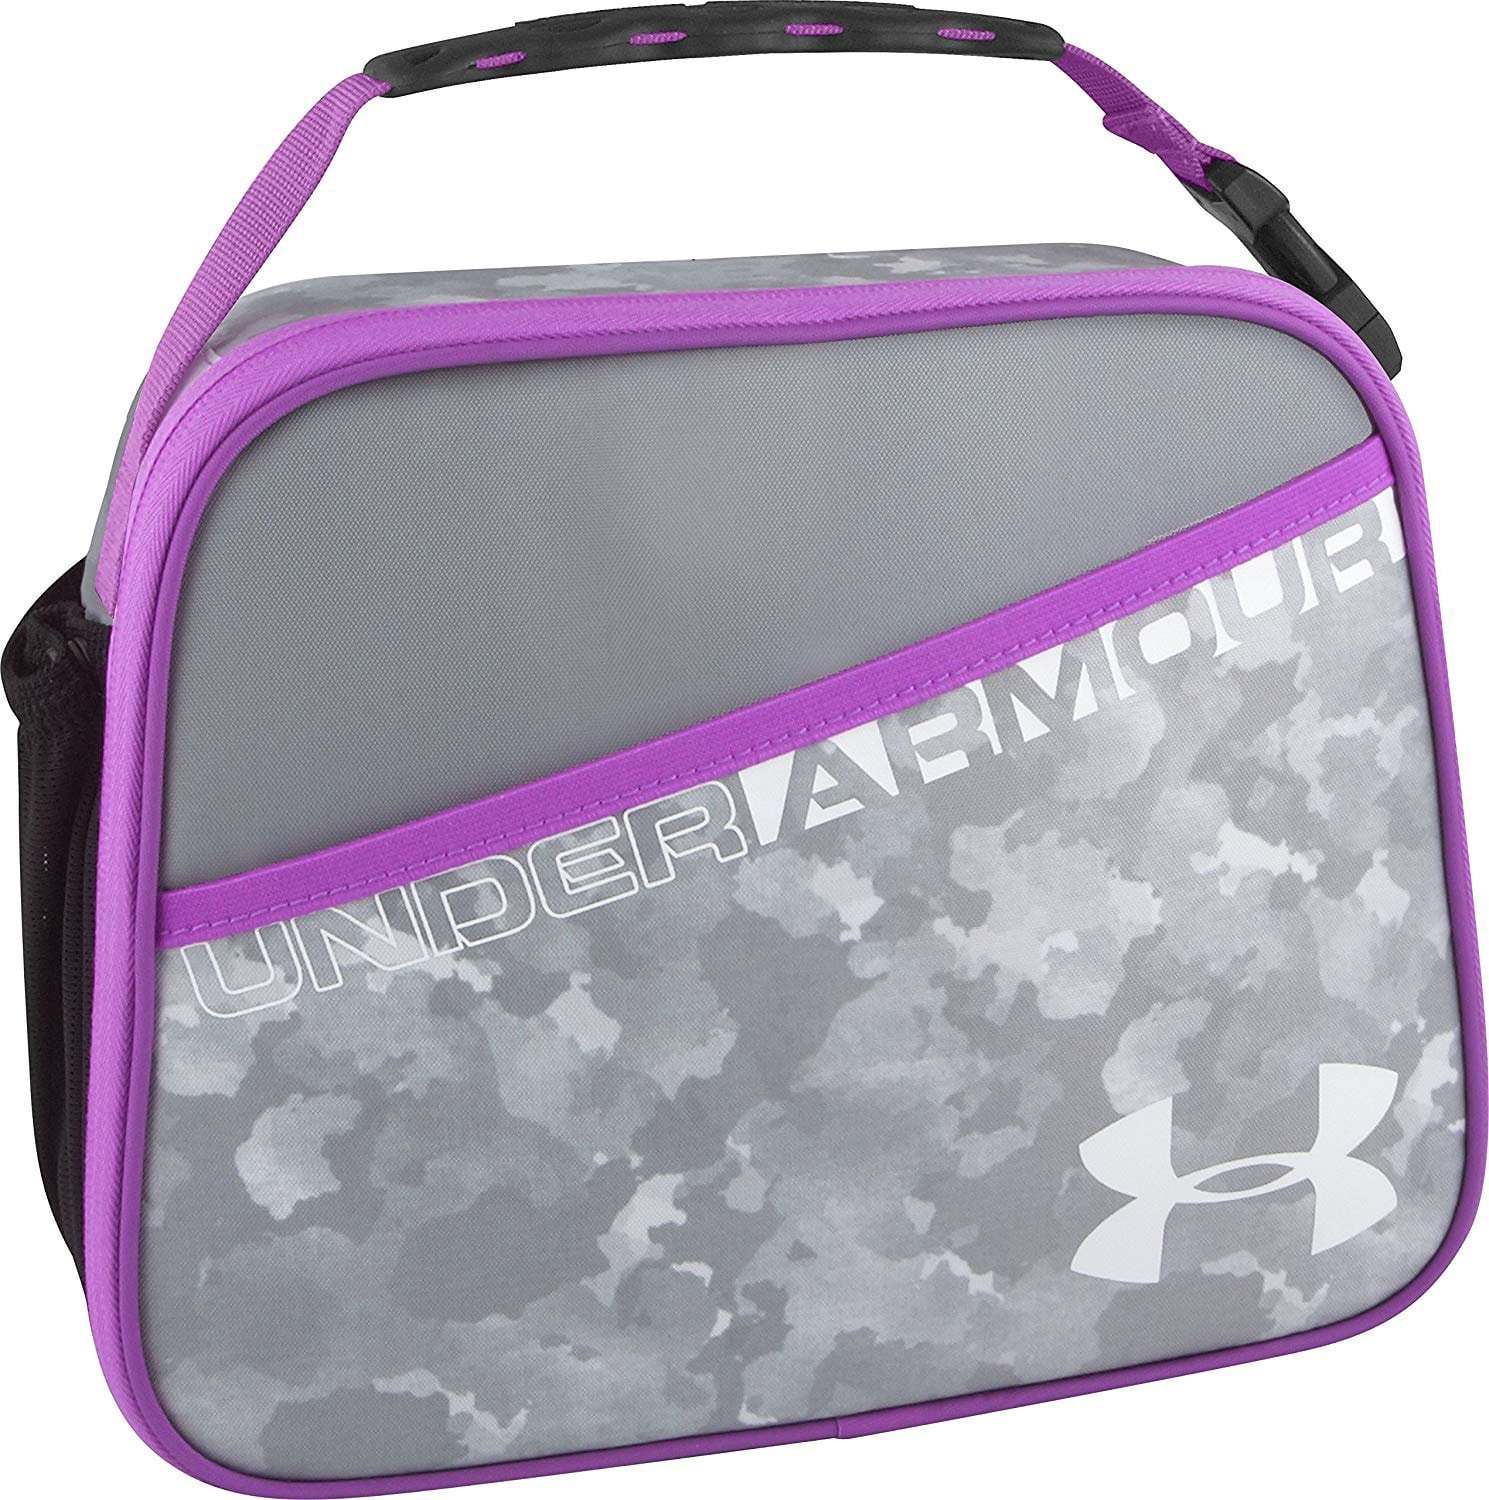 Under Armour Dual Compartment Cooler Insulated Gym Sport Travel Food Lunch Bag 